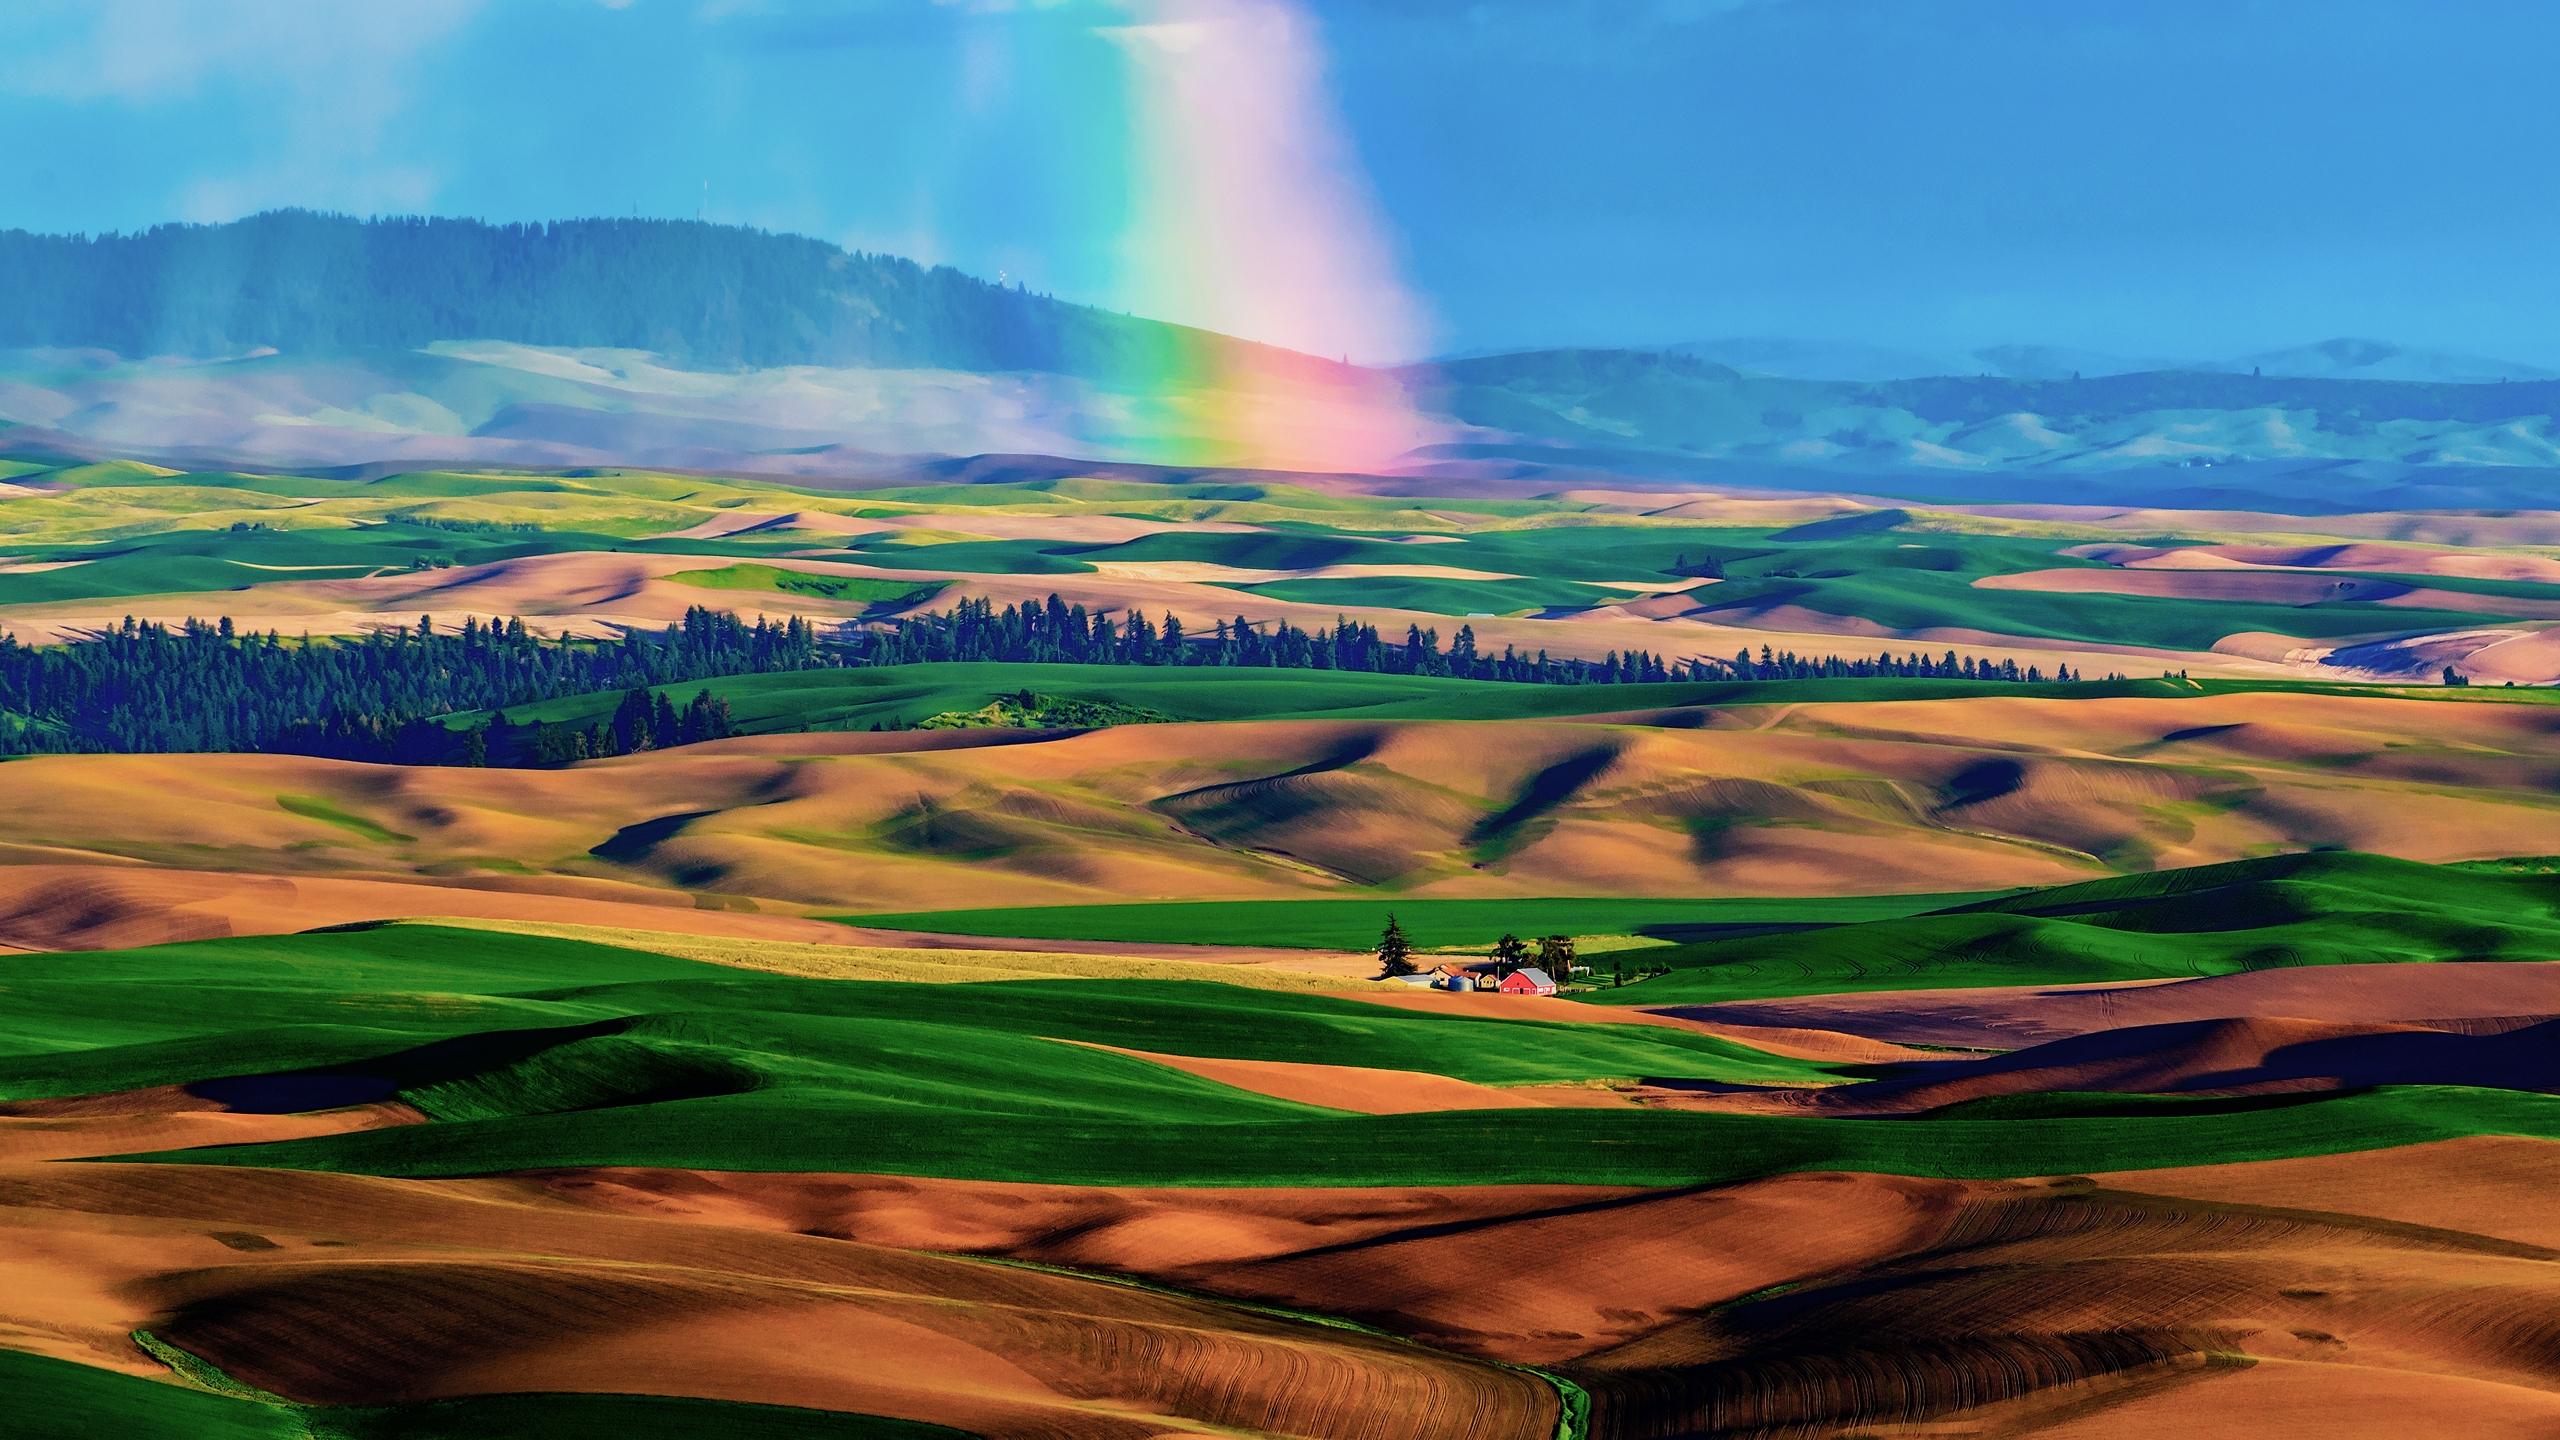 HDR Rainbow Landscape for 2560x1440 HDTV resolution